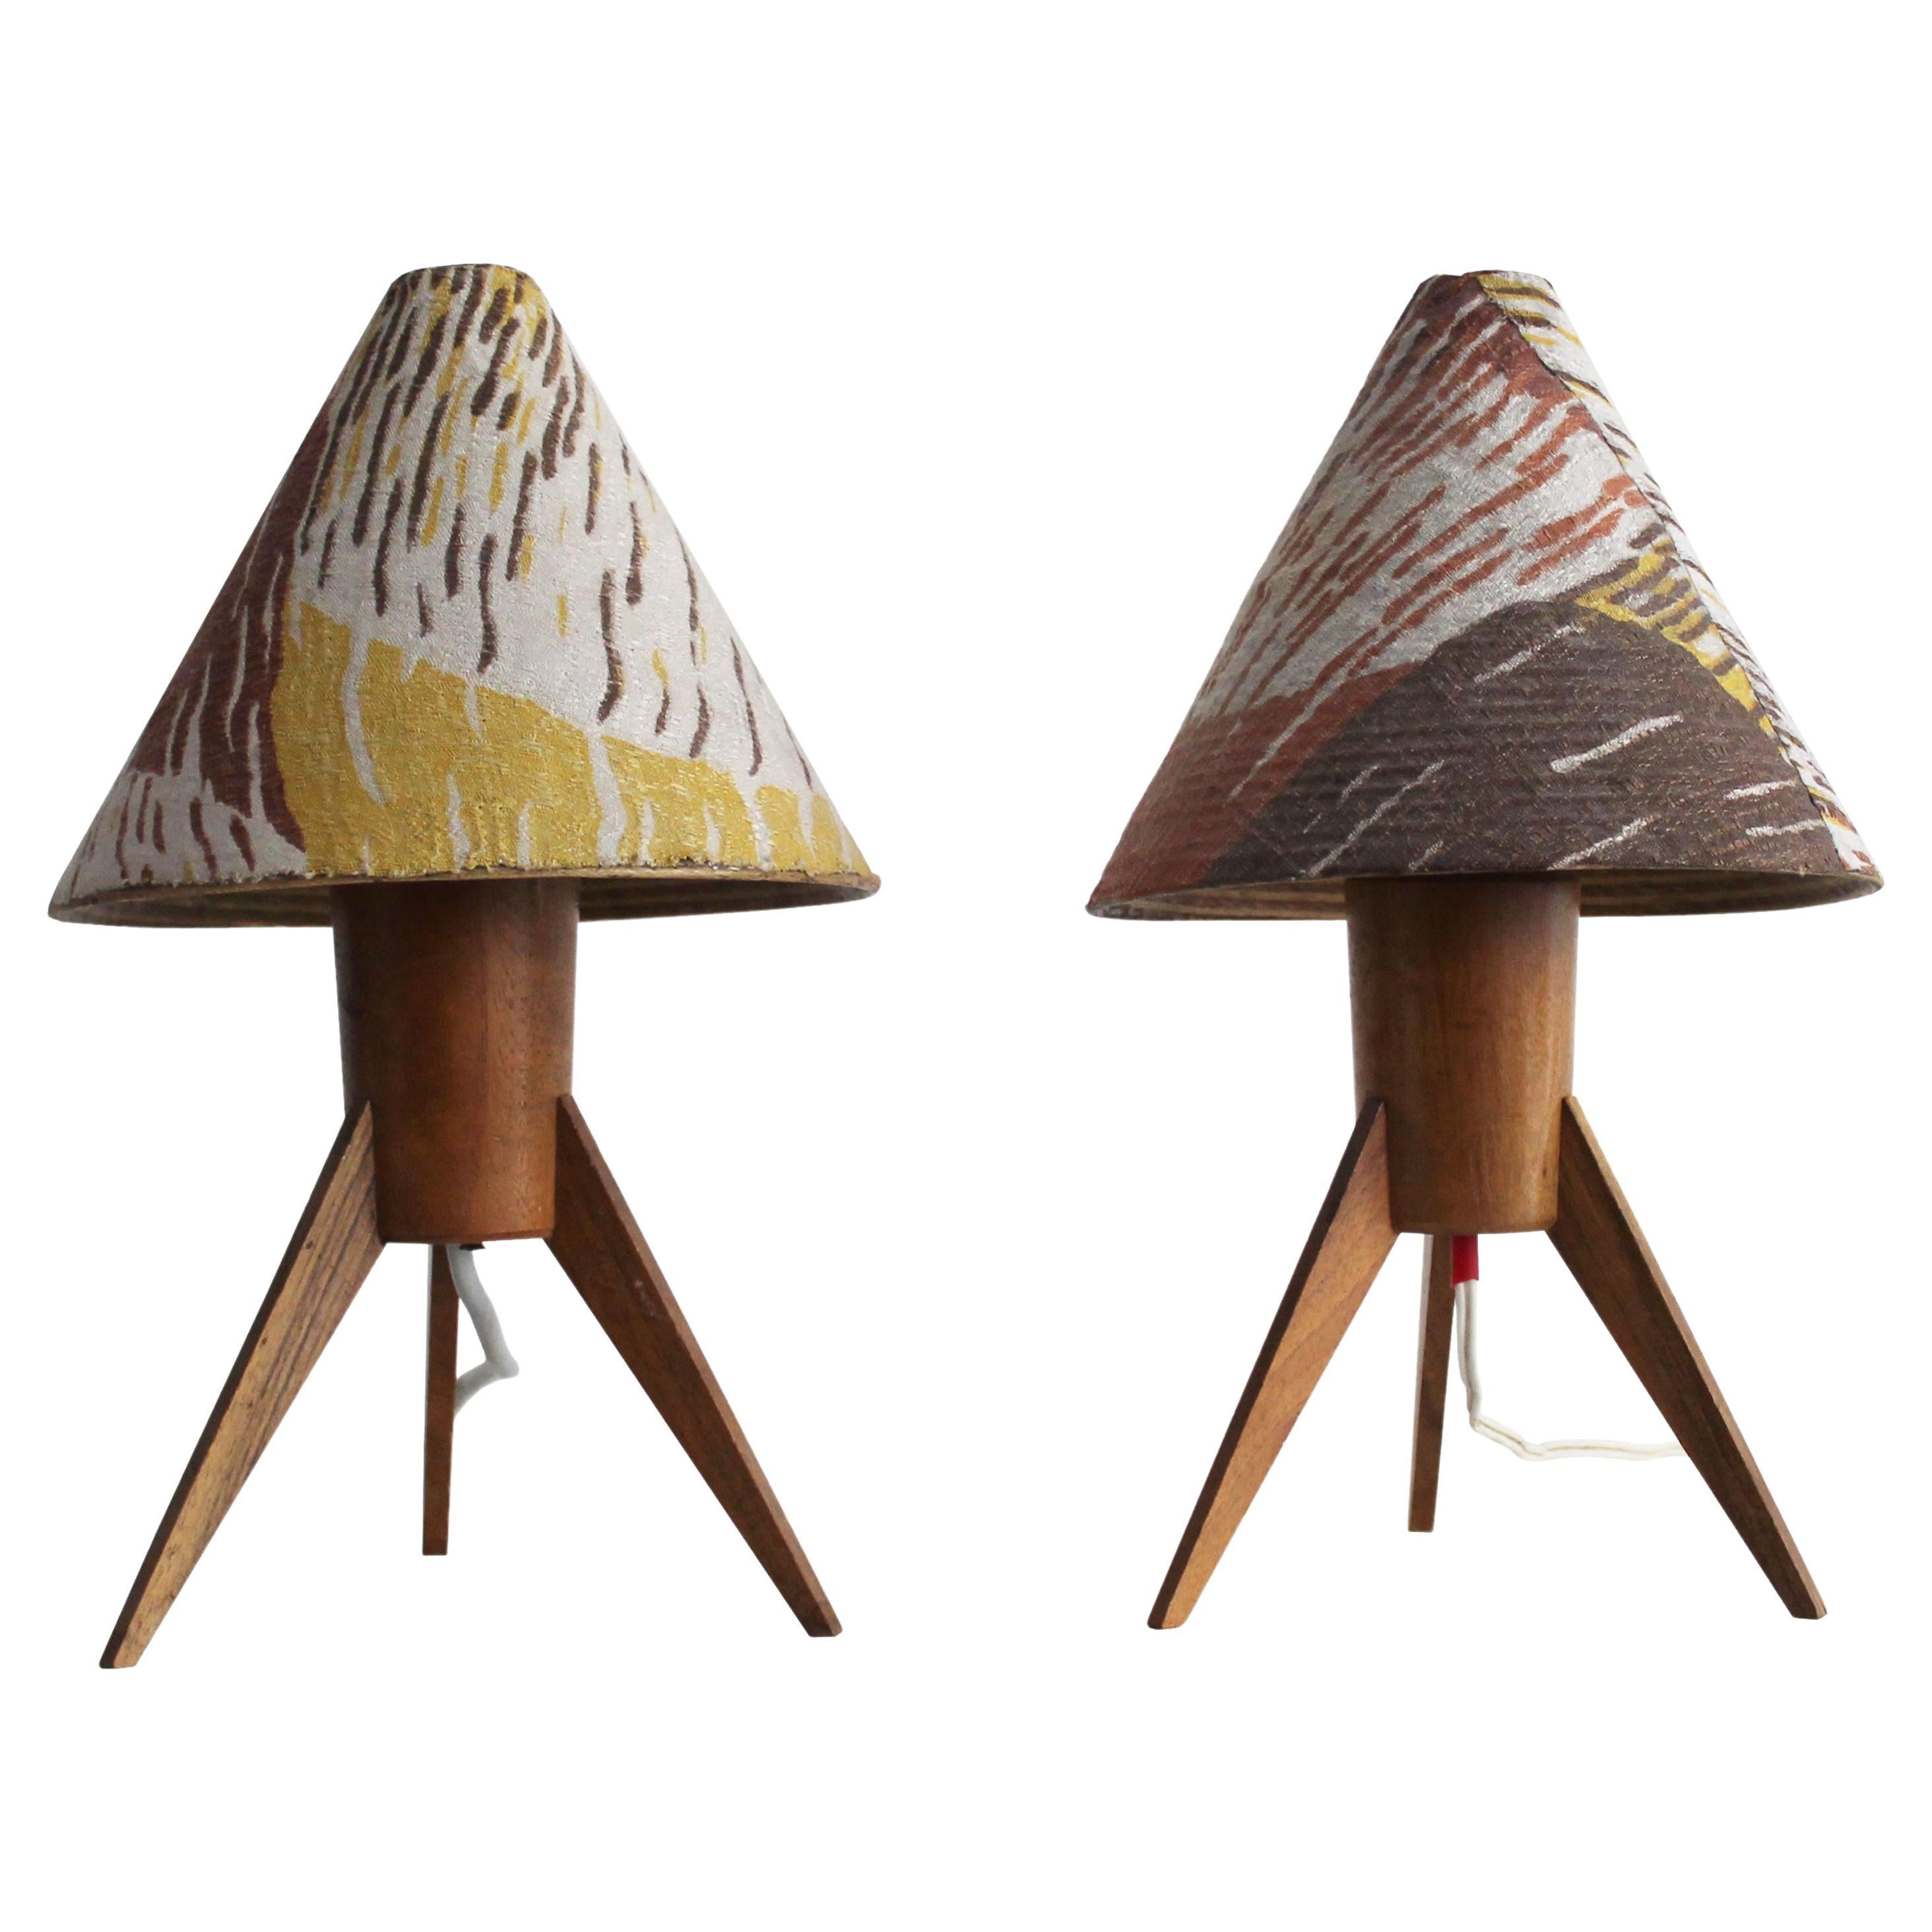 1960's Mid Century Pair of Bedside Table Lamps